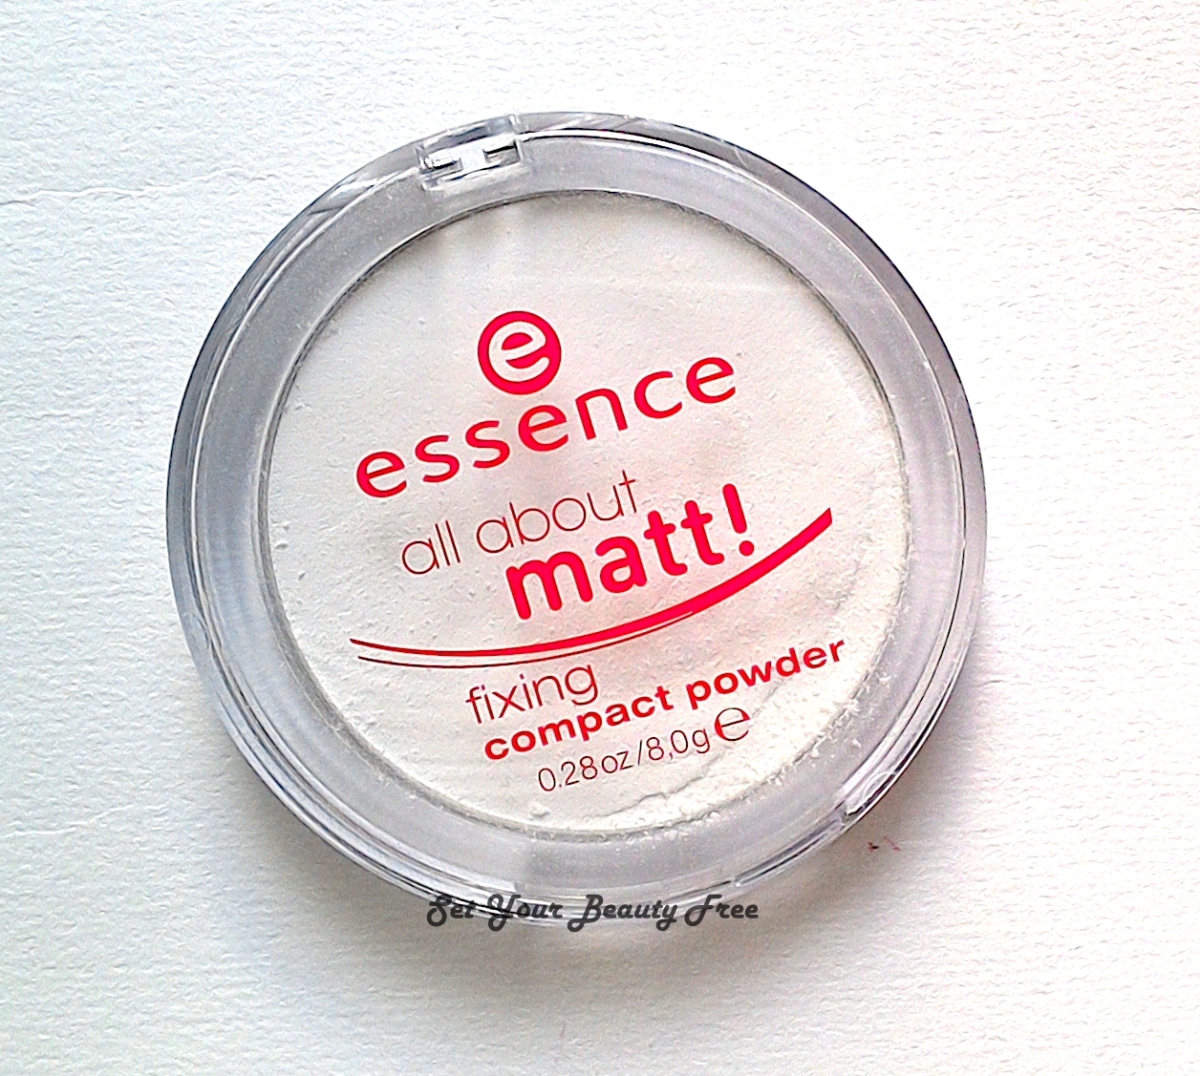 Essence All About Matt! Fixing Compact Powder [Review] – Set Your Beauty  Free | Puder